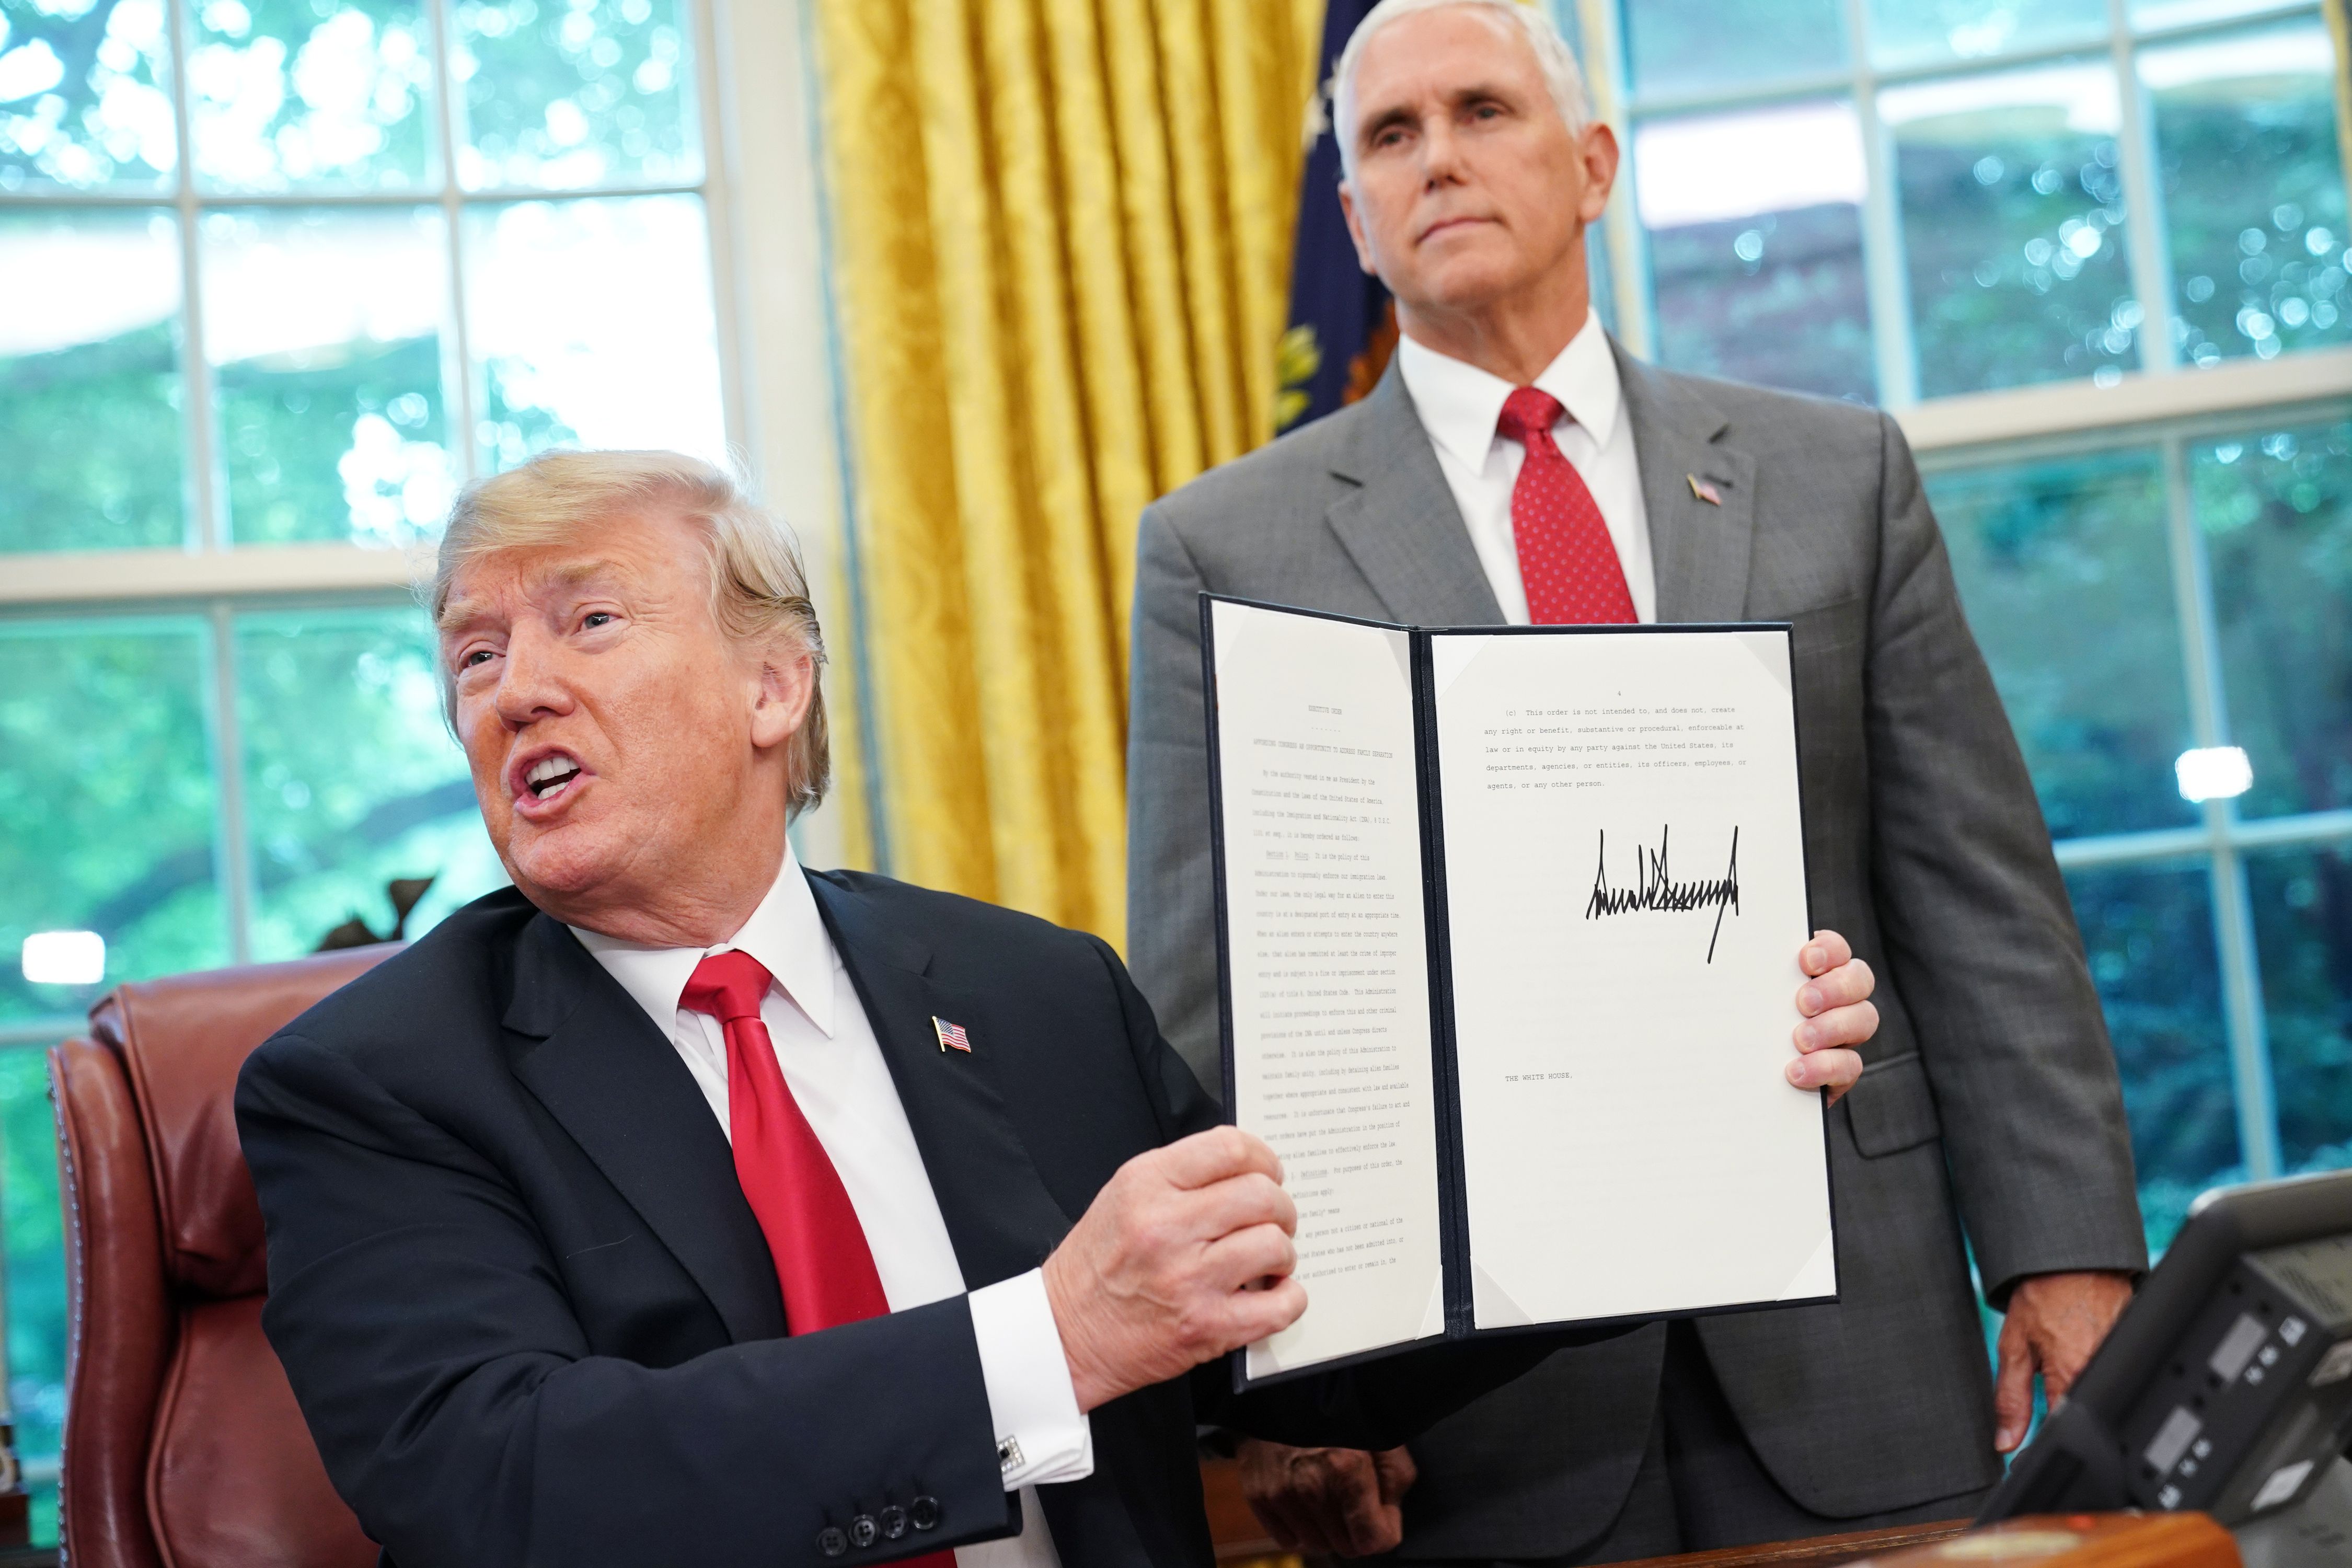 President Trump signs an executive order on immigration